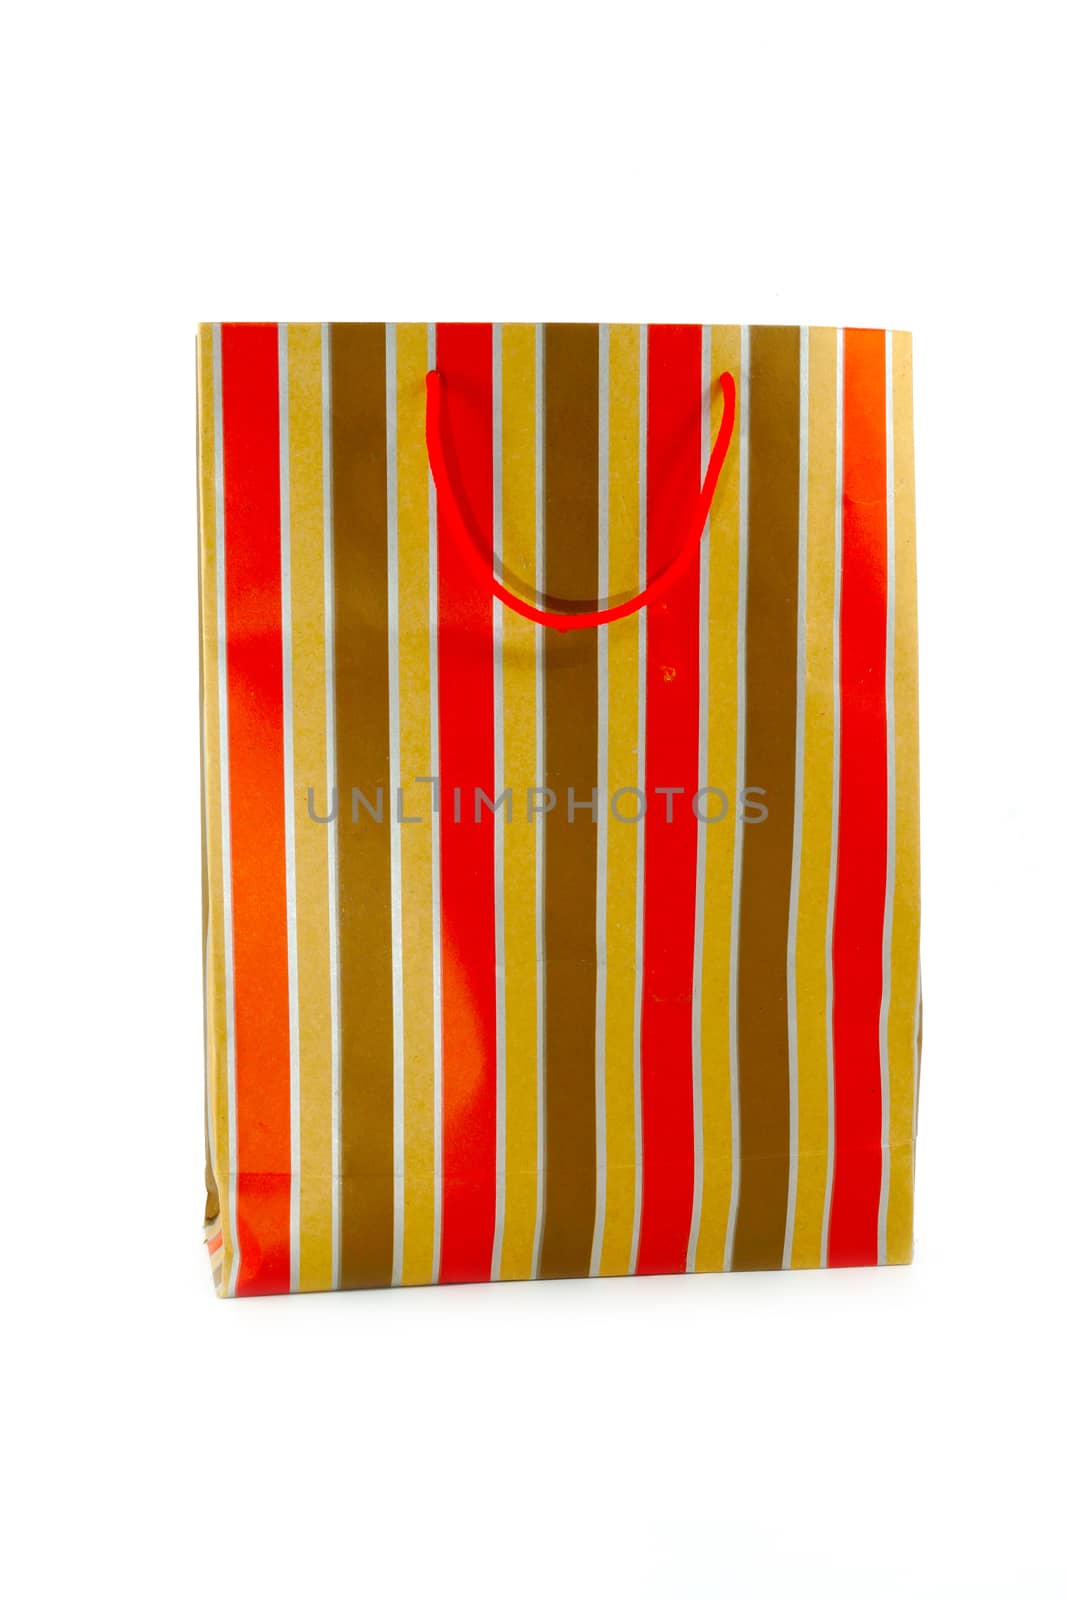 Assorted shopping and gift red paper bags - shopping and holiday concept